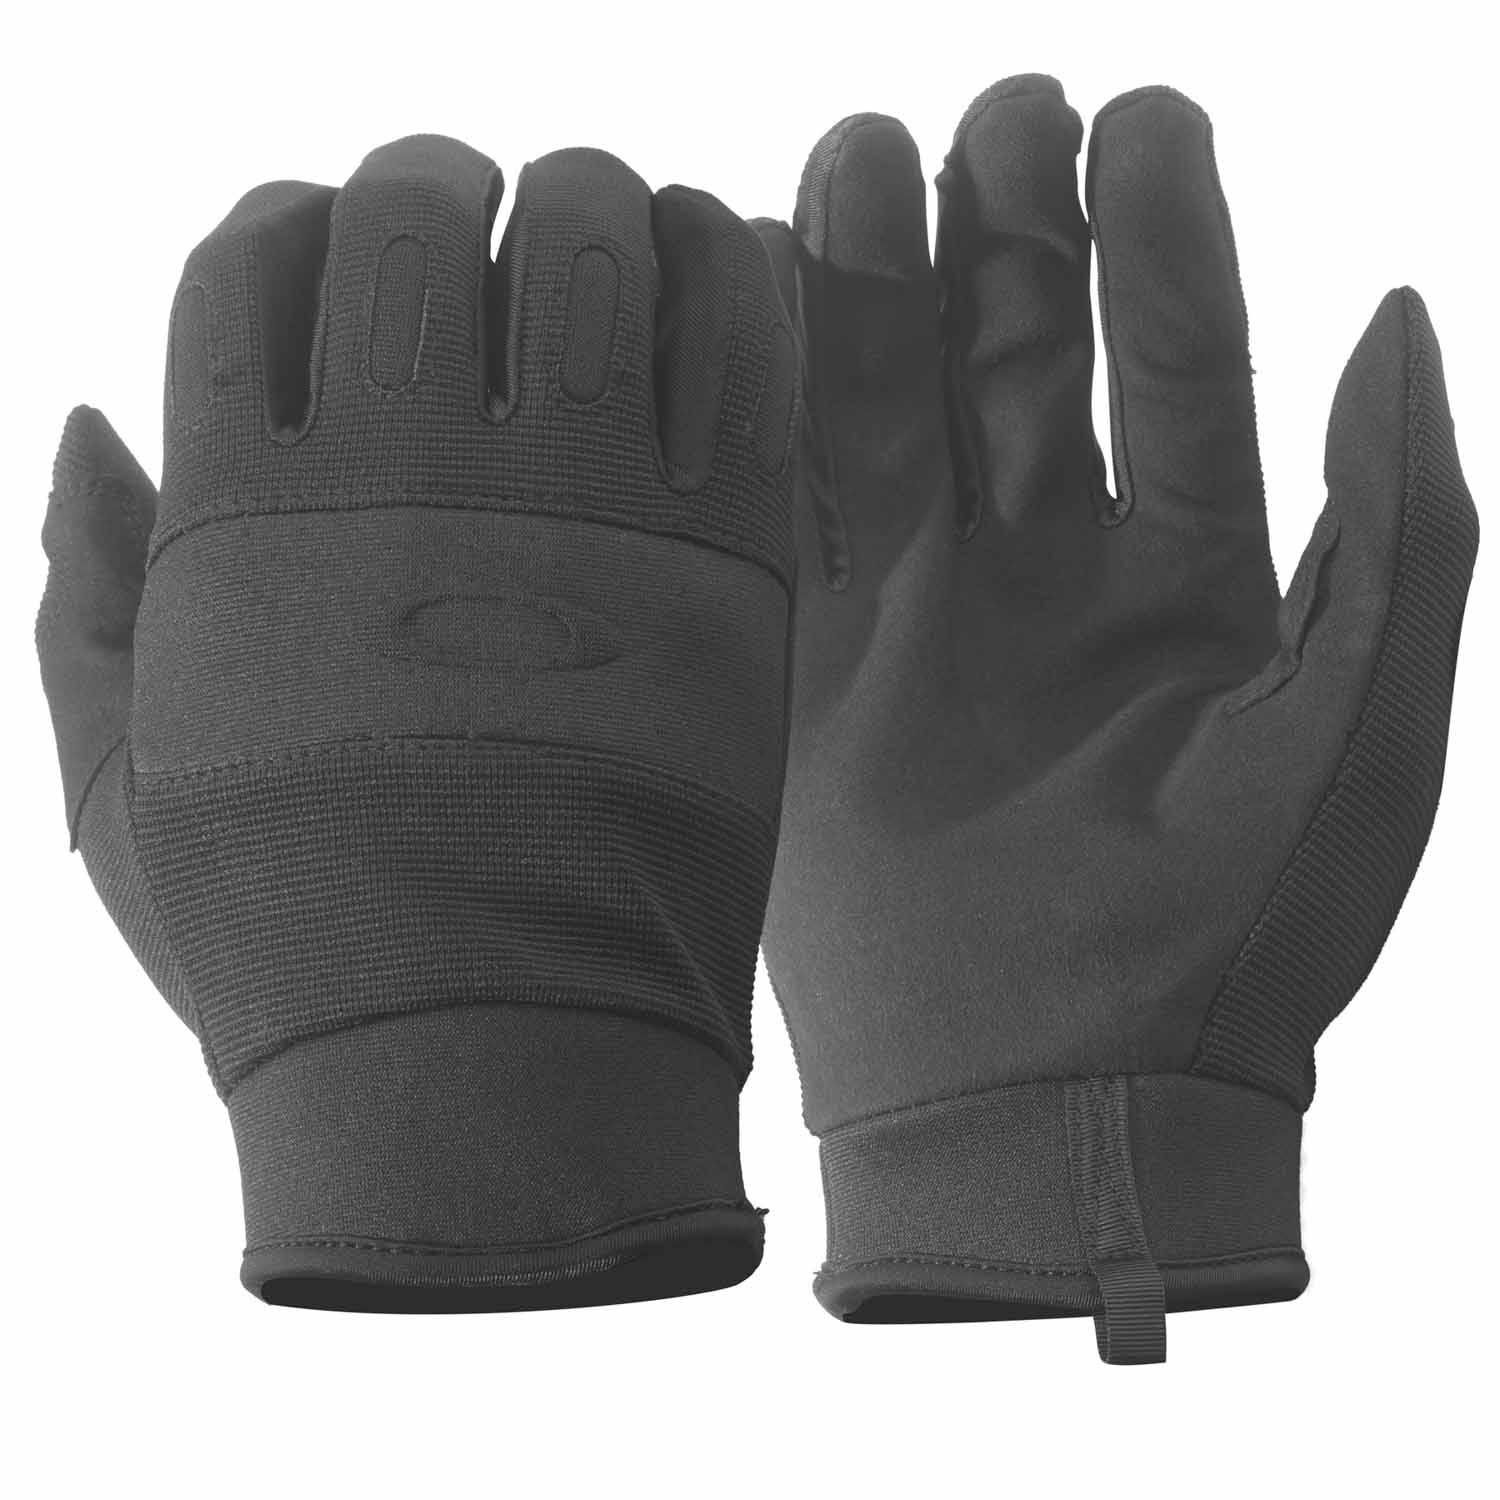 Oakley Police Gloves, Medical Gloves, Fire and Tactical Gloves